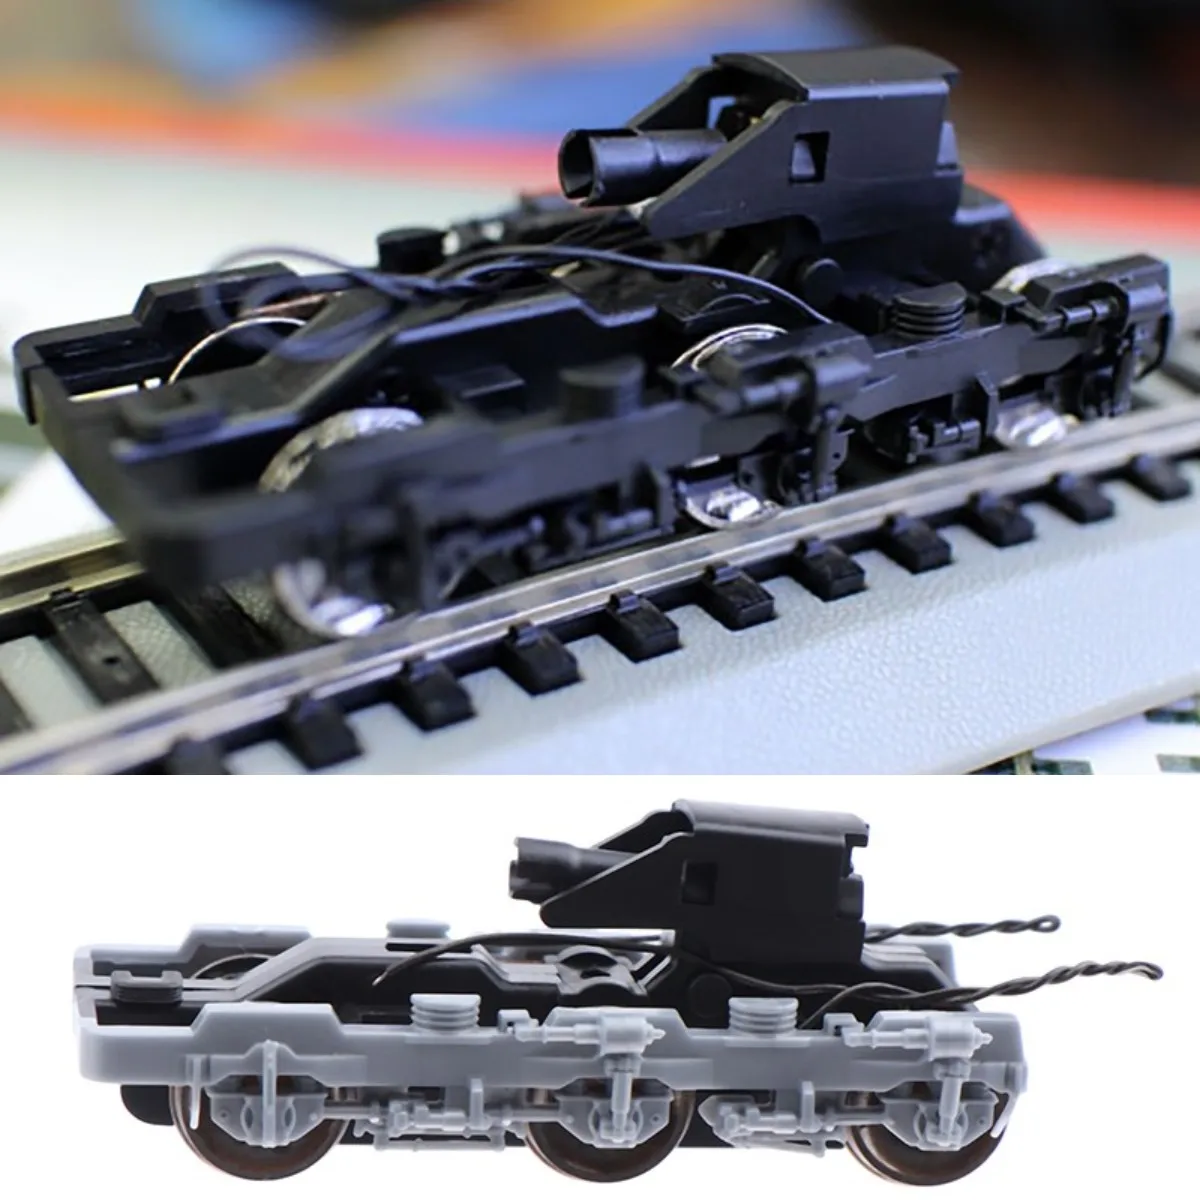 

HO Scale 1:87 Undercarriage Bogie Model Railway Layout Accessories Electric Train Parts Chassis DIY Diorama Landscape Black/Gray